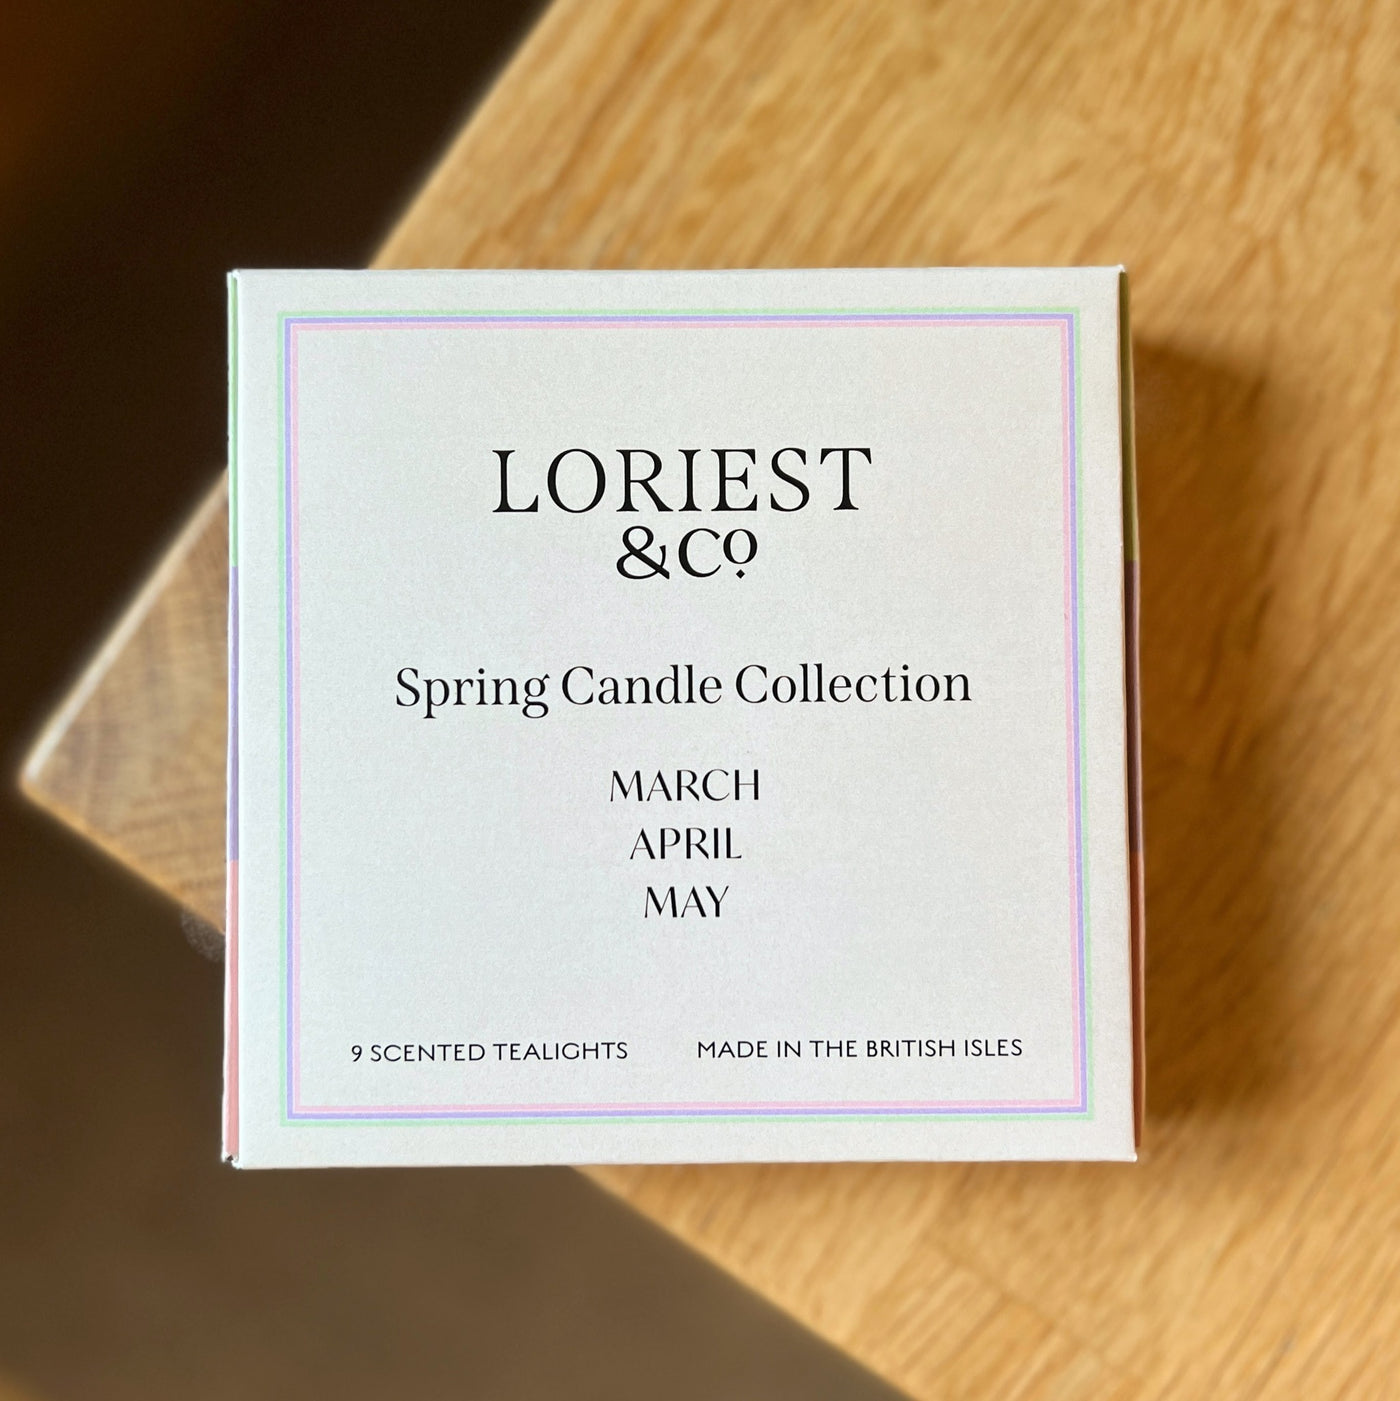 Our Spring candle collection brings a trio of seasonal uplifting scents into your home with our 9 tealights. Hand poured in England using sustainable plant-based wax. 